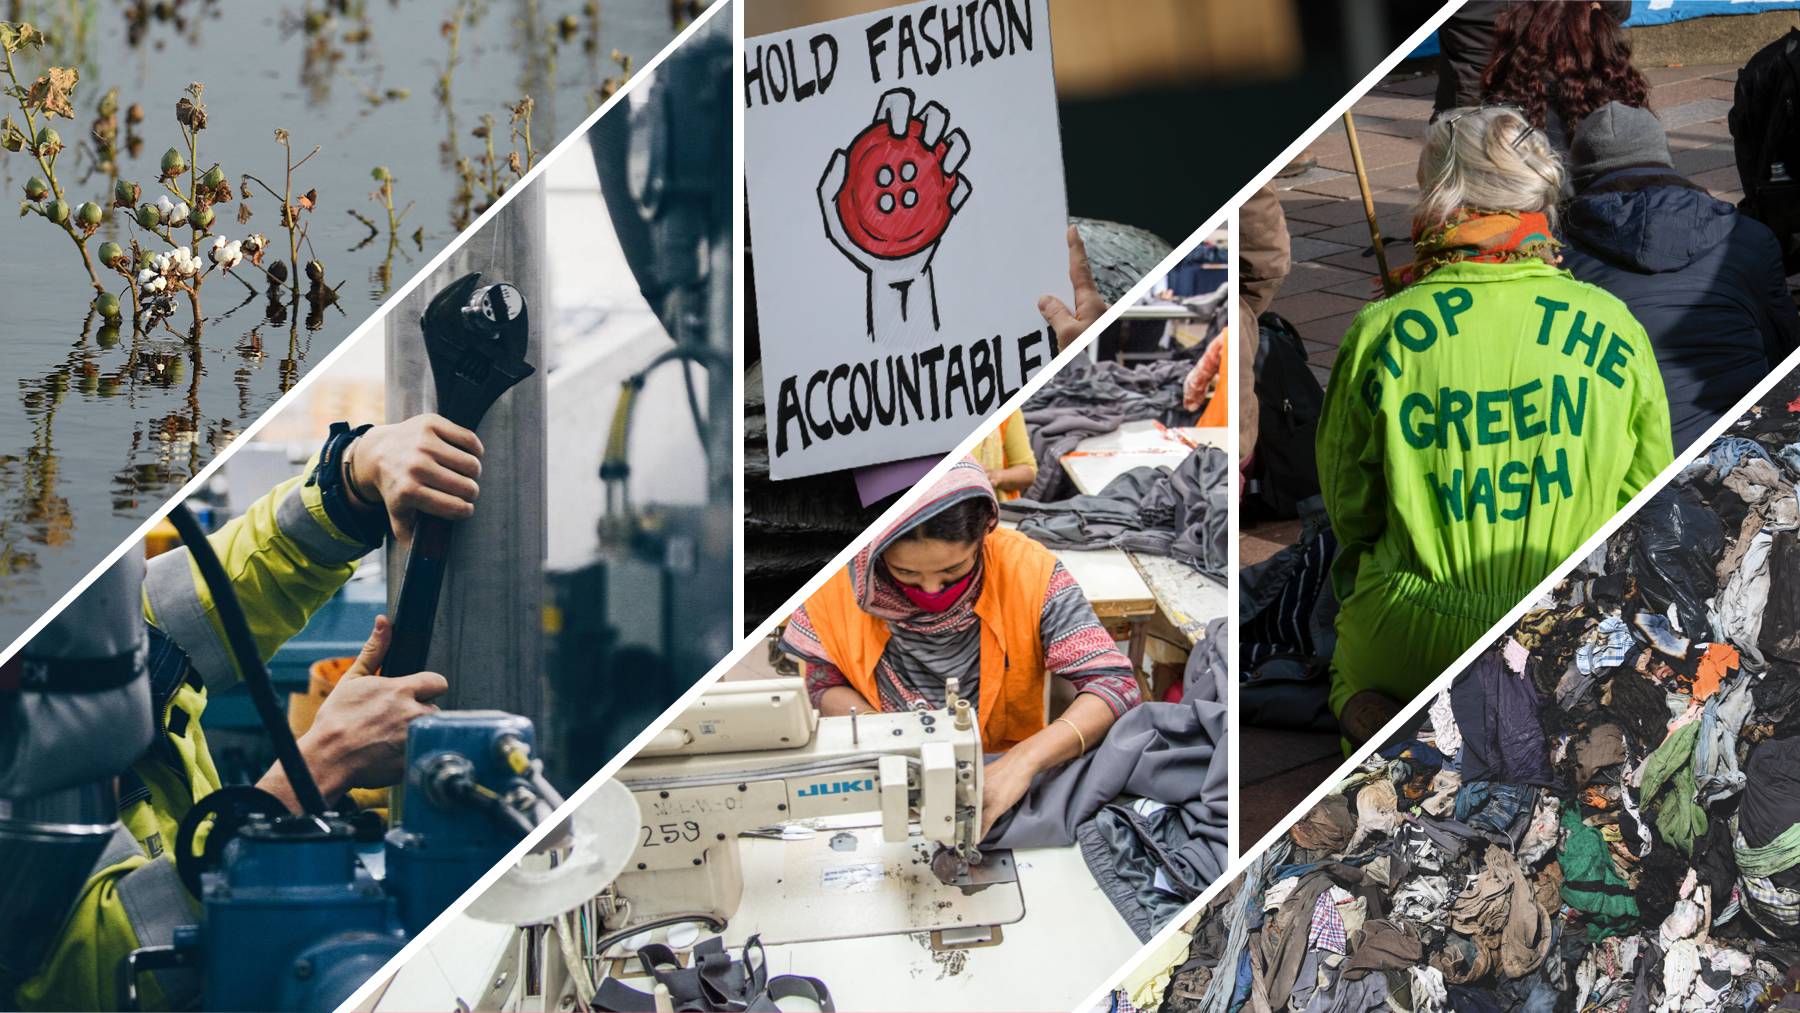 [Left to right] Cotton fields flooded in Pakistan; Renewcell's textile recycling plant; protest sign at a rally for the New York Fashion Act; garment workers in Bangladesh; protestor against greenwashing at an Extinction Rebellion event; clothing waste.